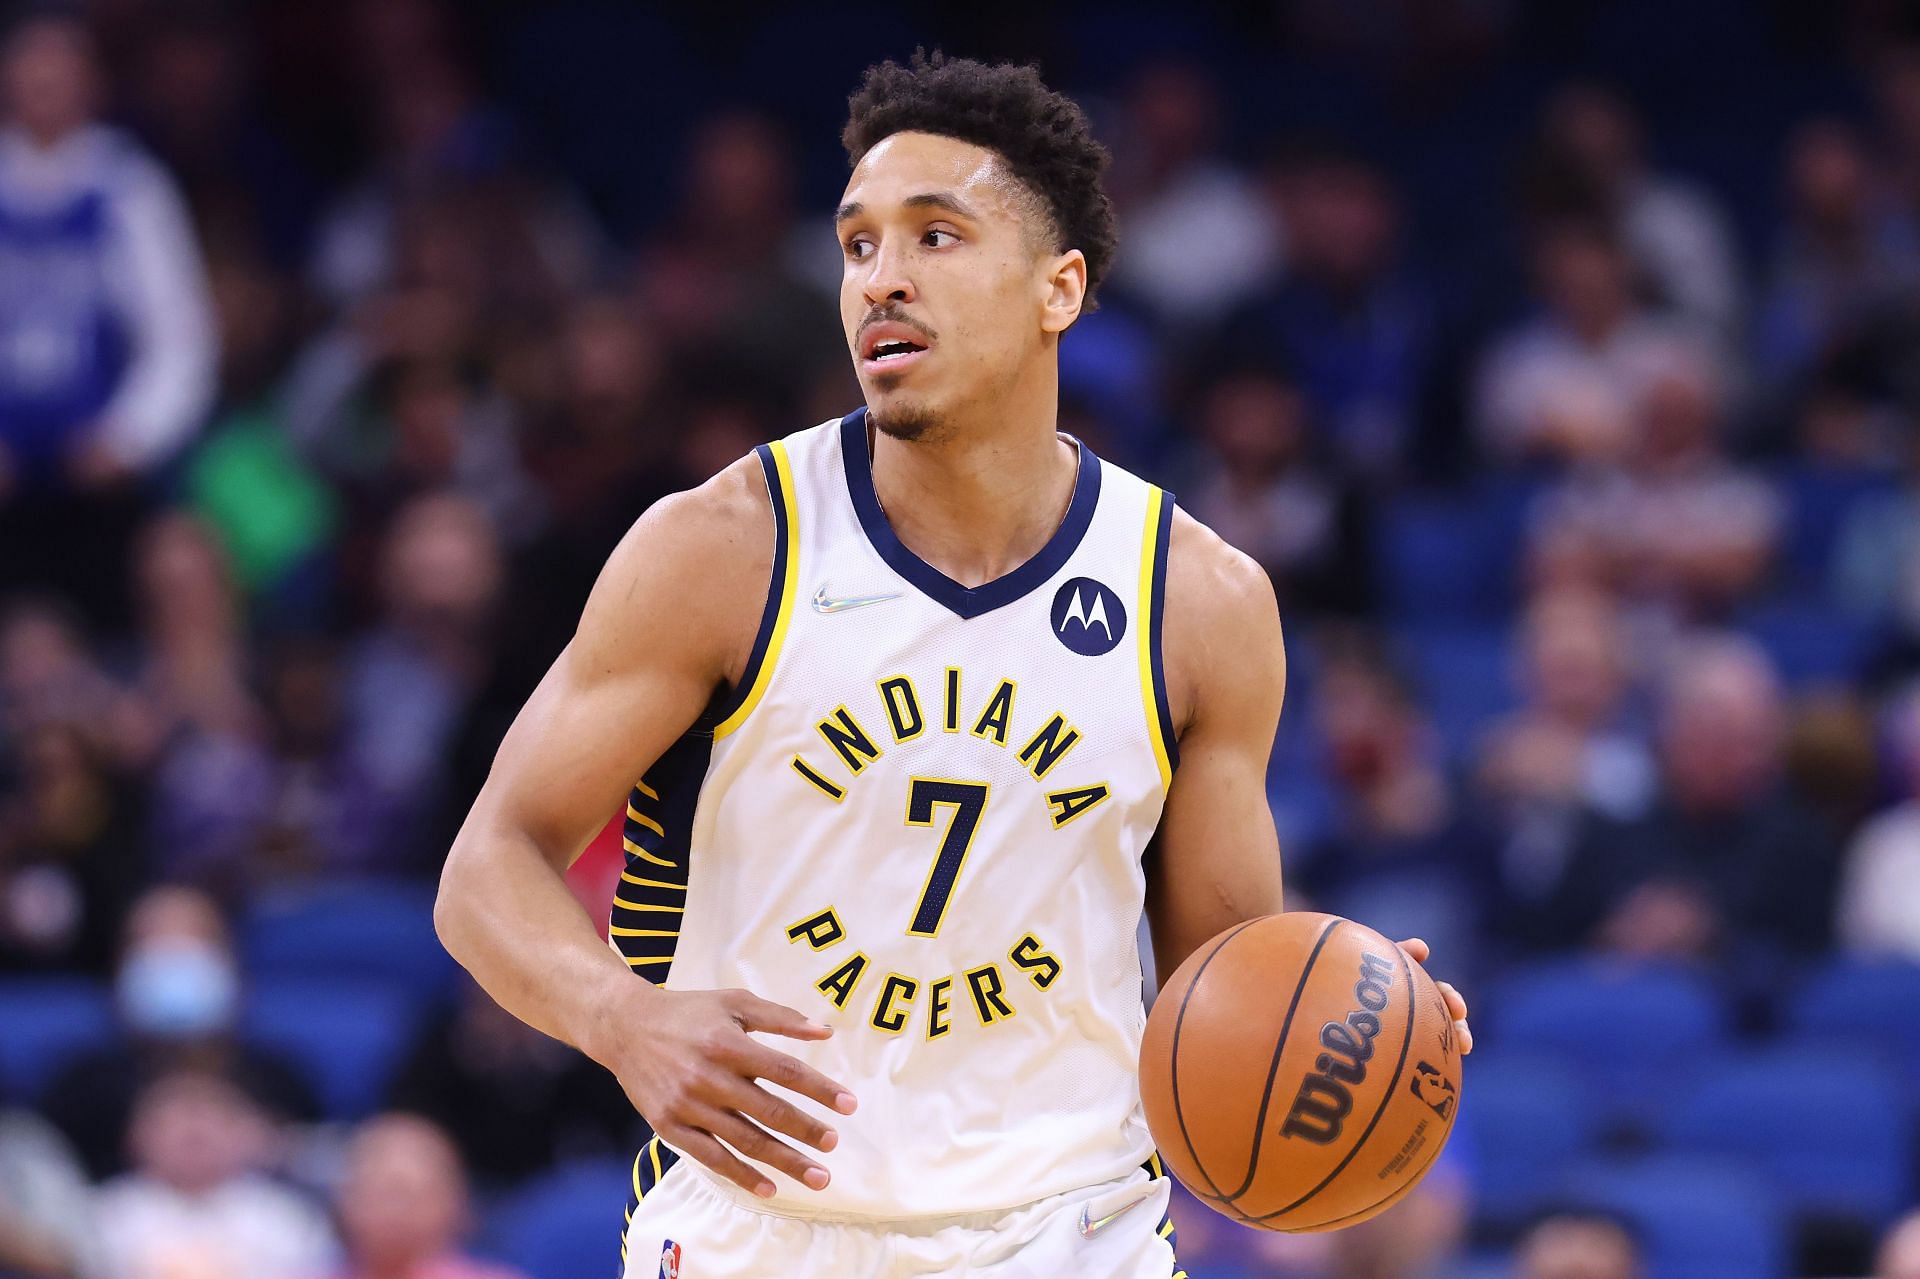 Brogdon was one of the top acquisitions this year.